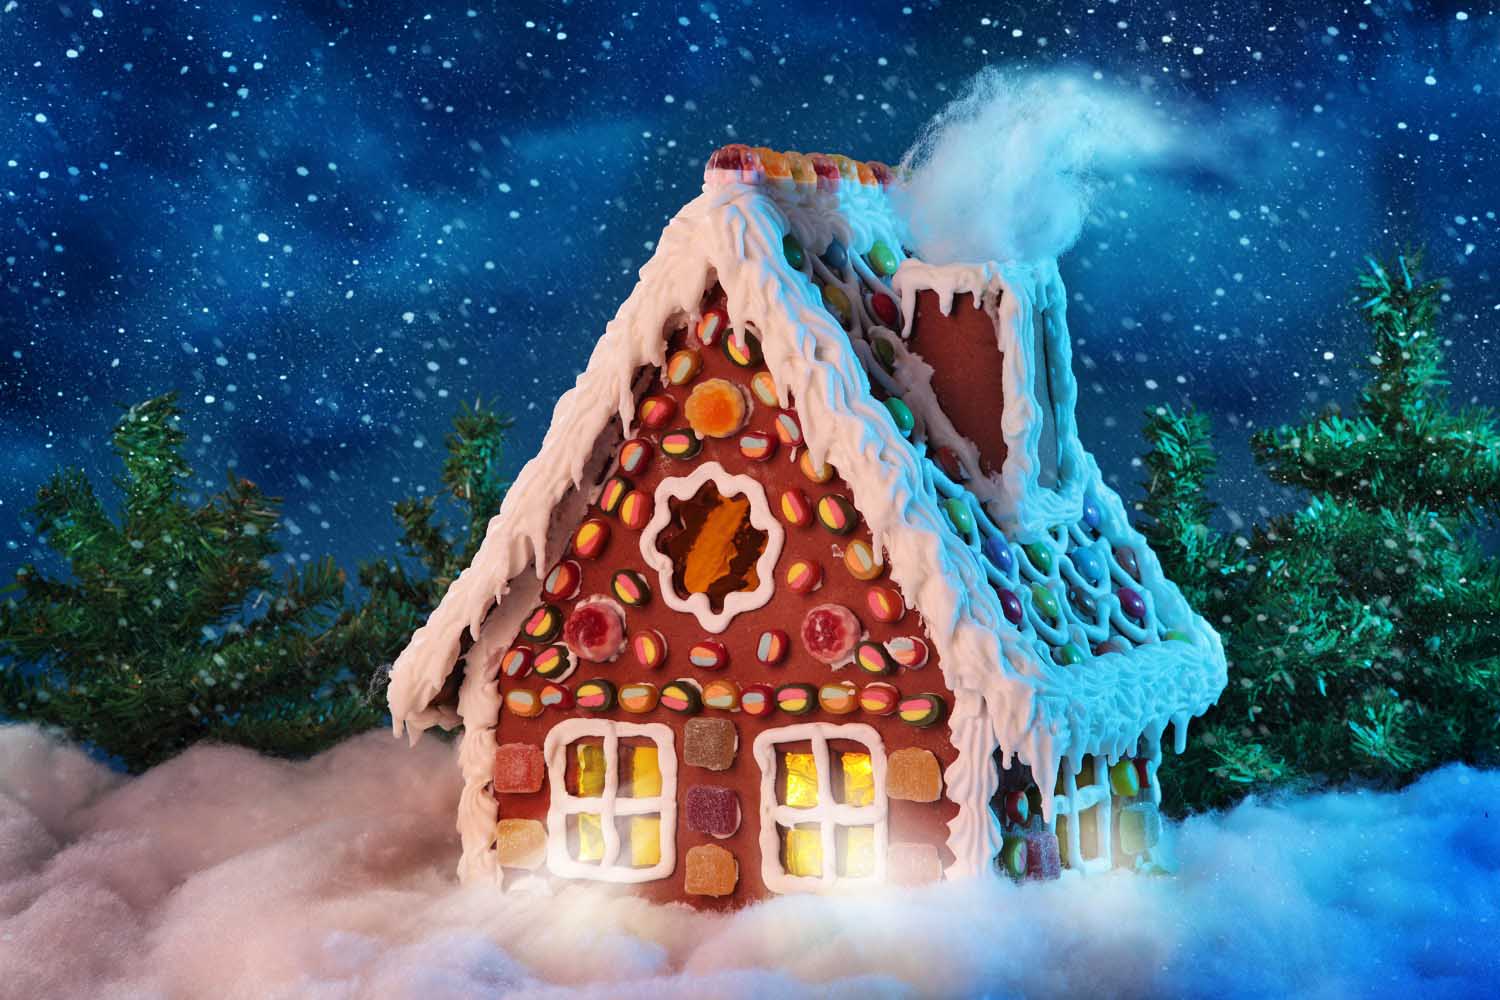 Christmas Gingerbread House With Grand Fir Forest Backdrop IBD-246916 size:1.5x1